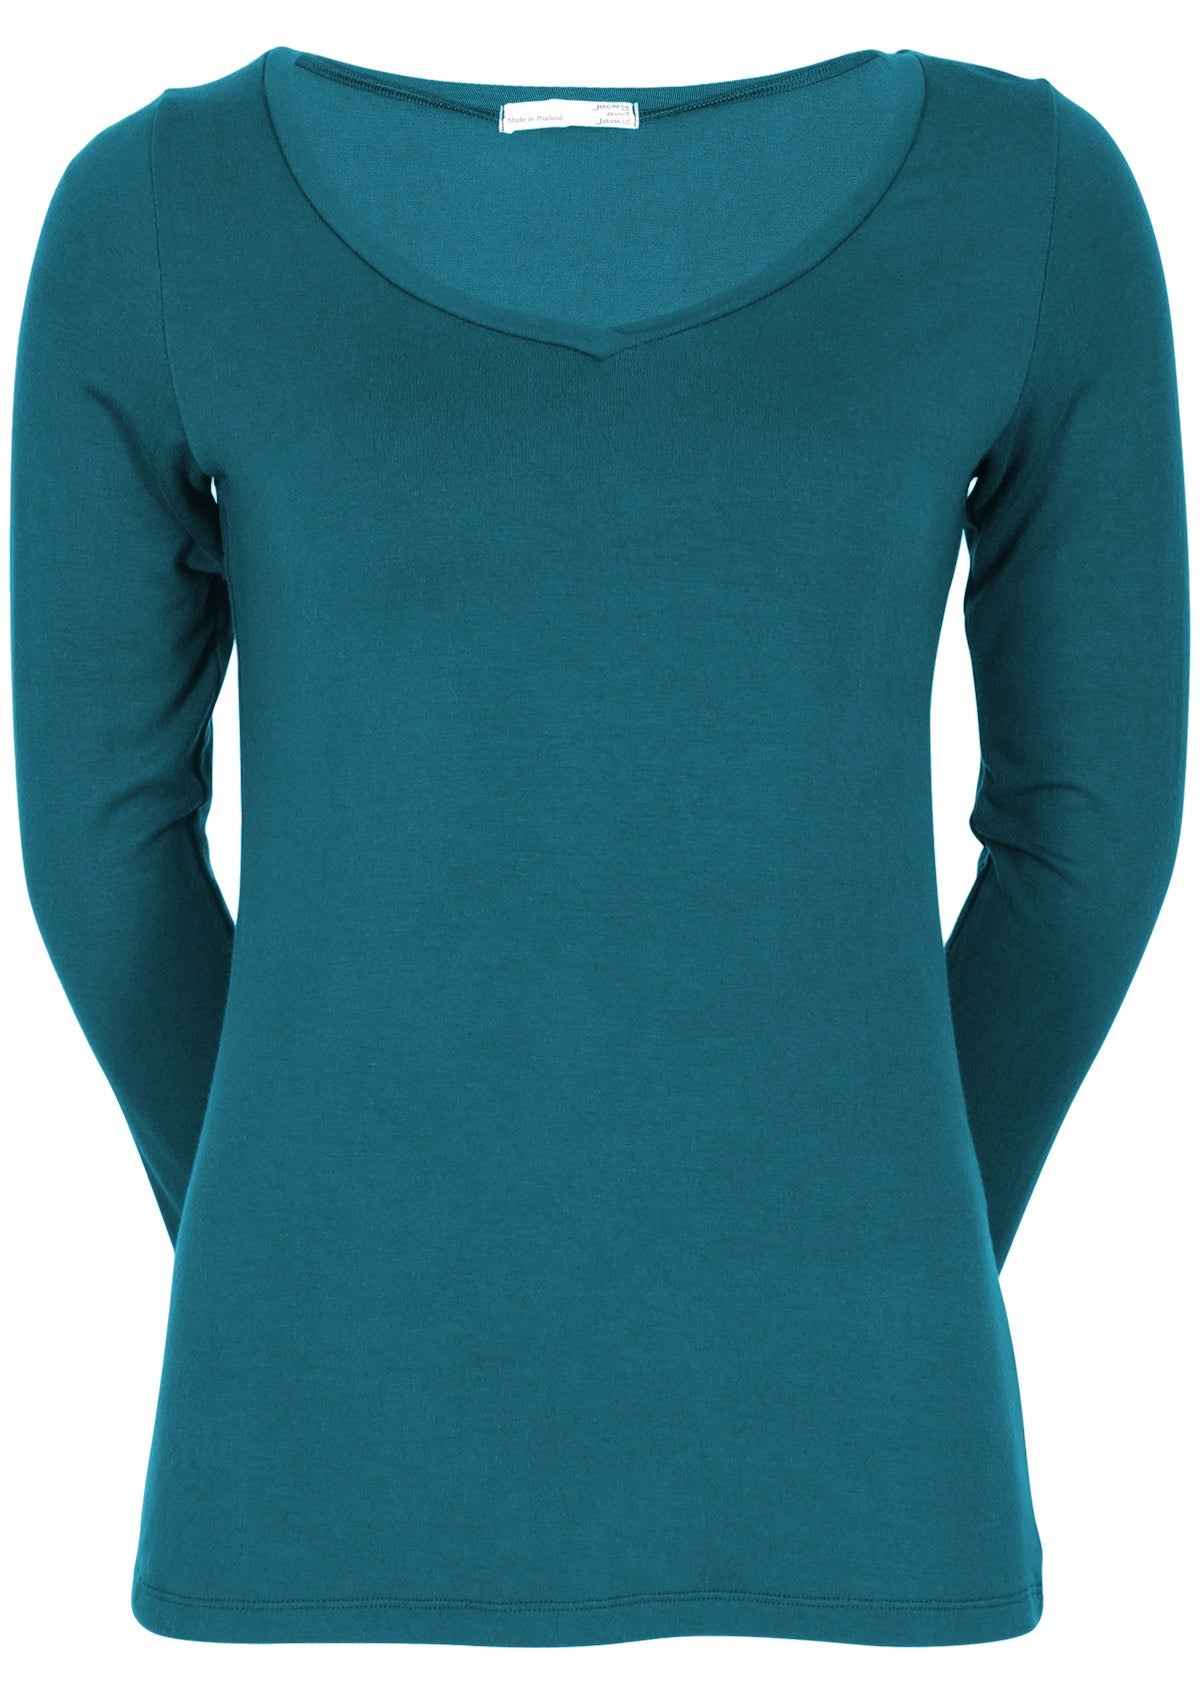 Front view of women's teal long sleeve stretch v-neck soft rayon top.